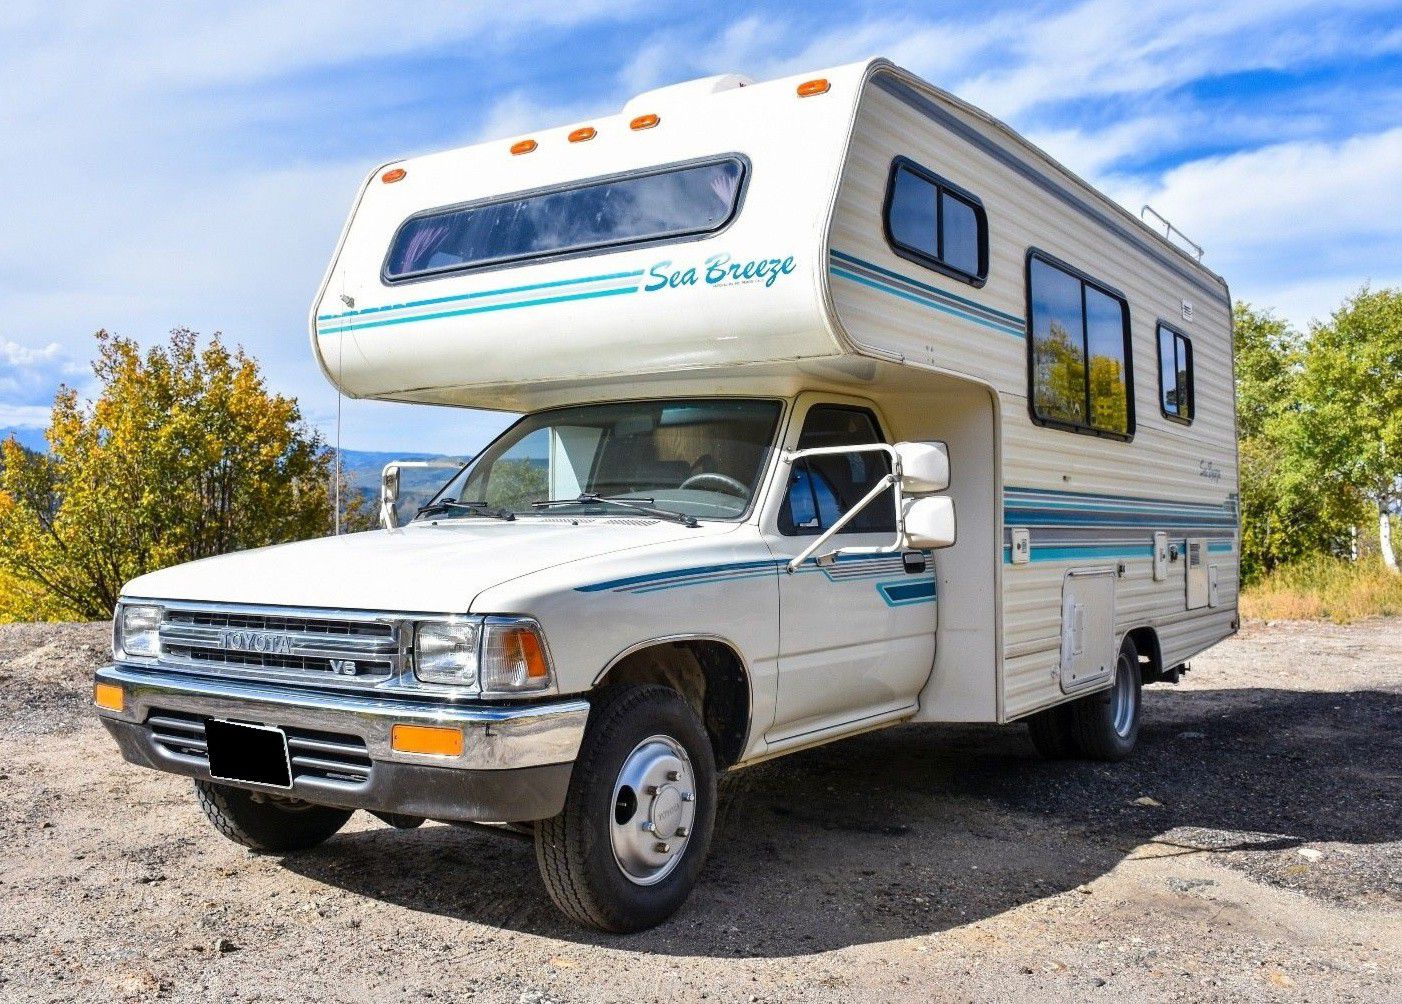 Photo TOYOTA Sea Breeze low miles.RV Class C $1,000one Owner